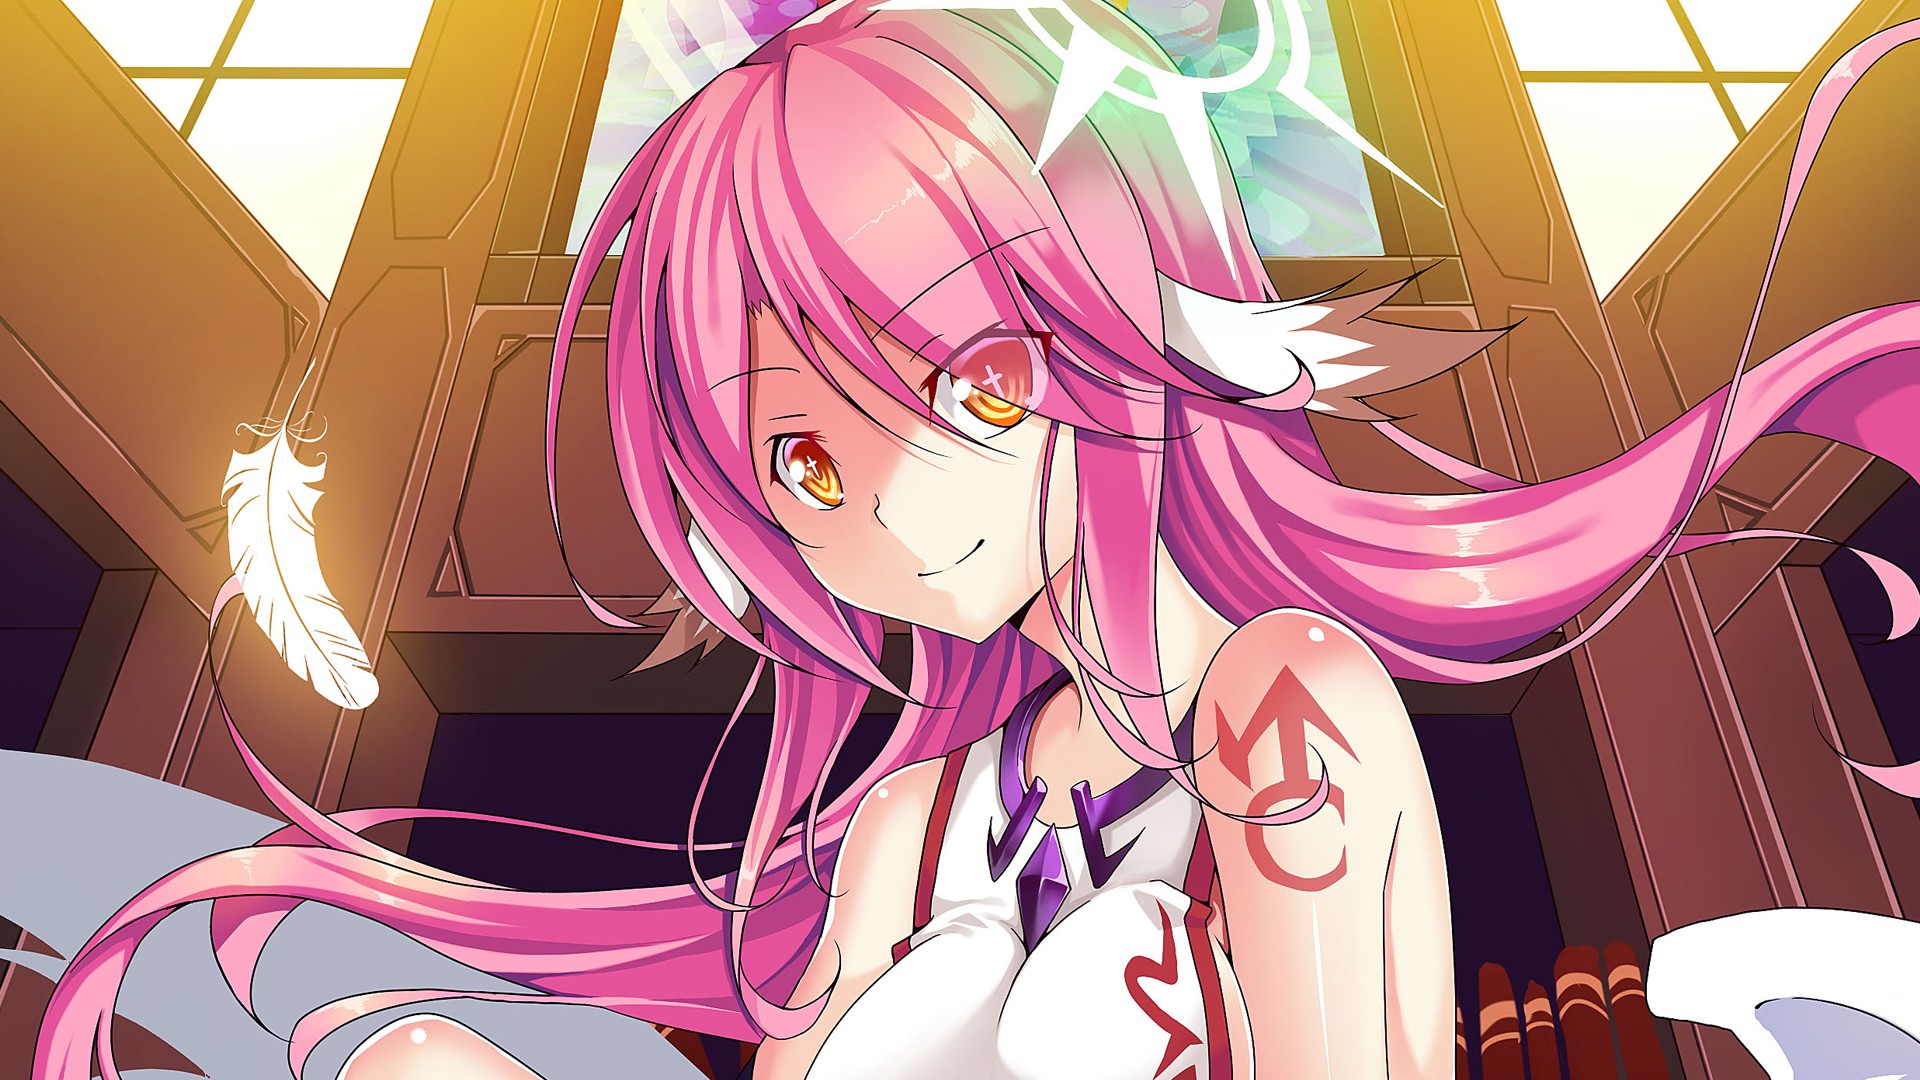 Jibril No Game No Life Anime Girls Anime Pink Hair Looking At Viewer 1920x1080